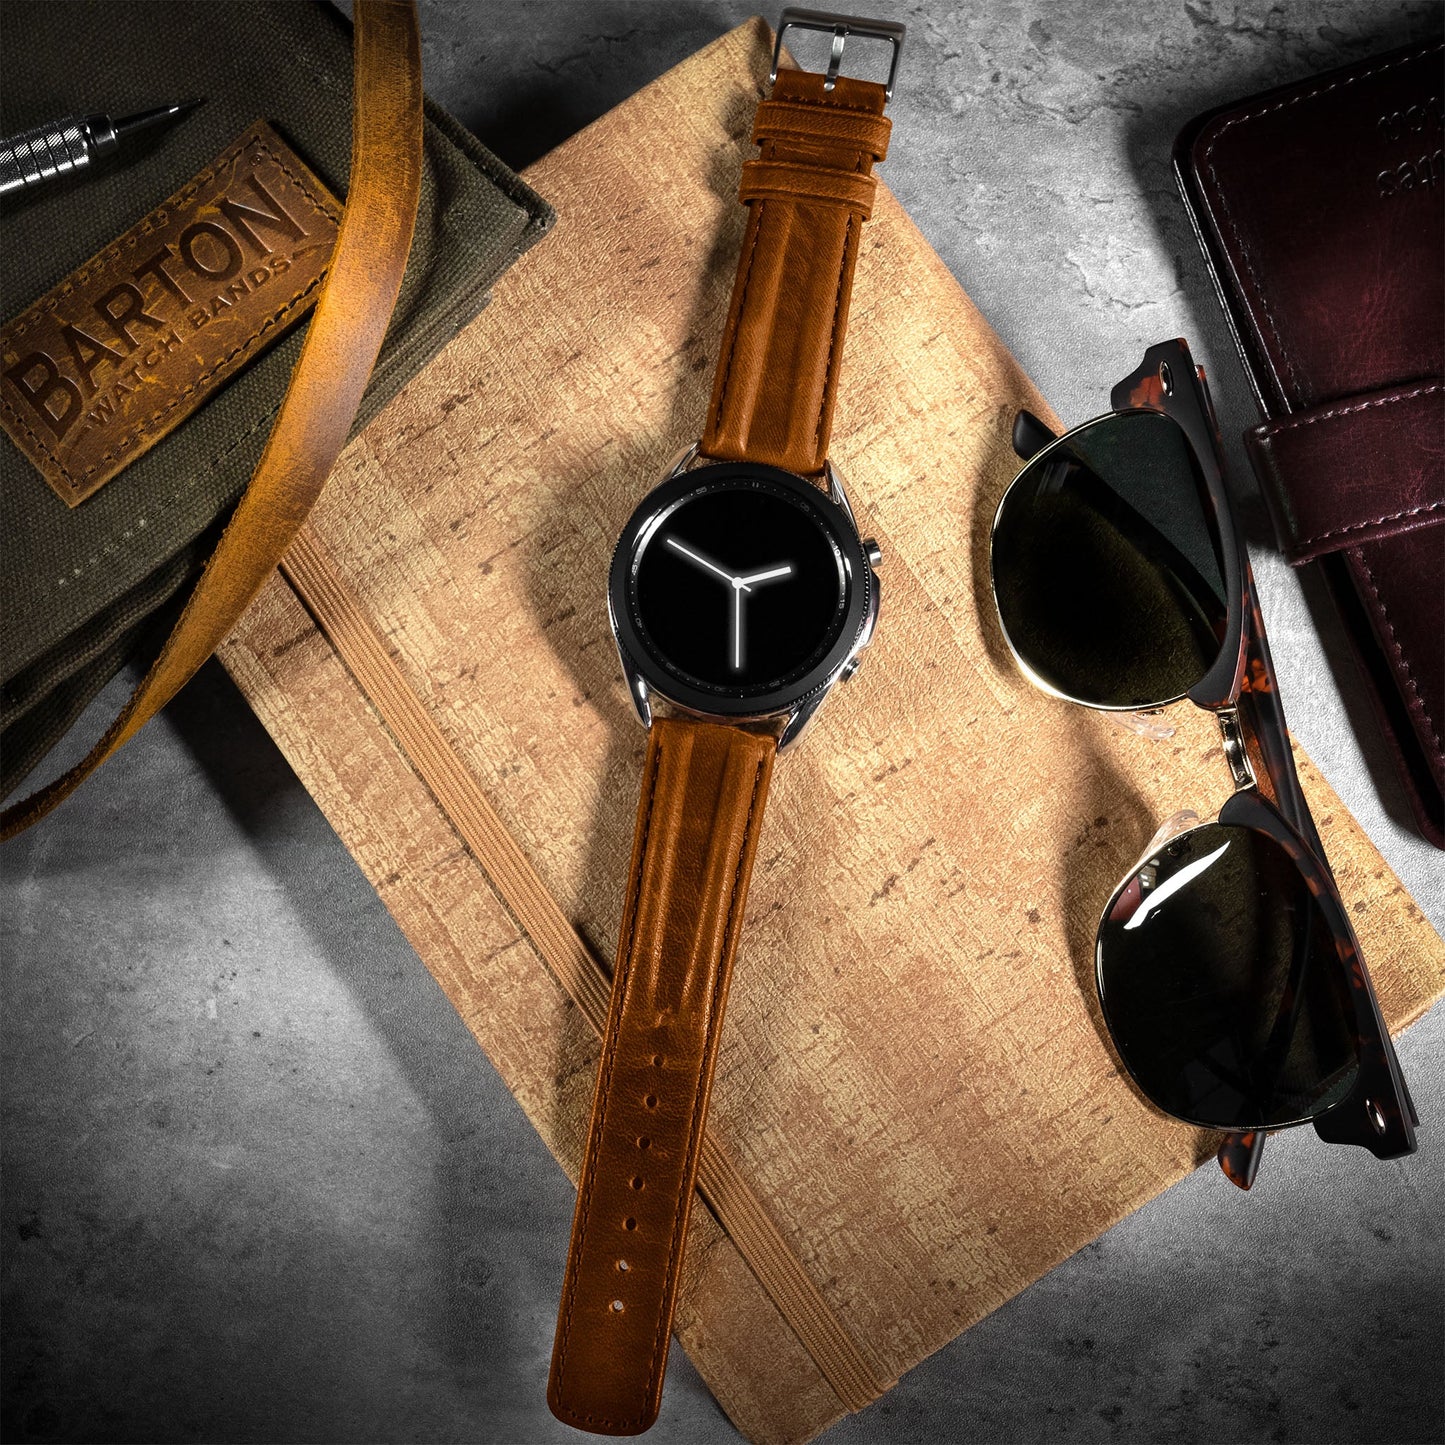 Samsung Galaxy Watch Active 2 | Classic Horween Leather | Caramel Brown - Barton Watch Bands